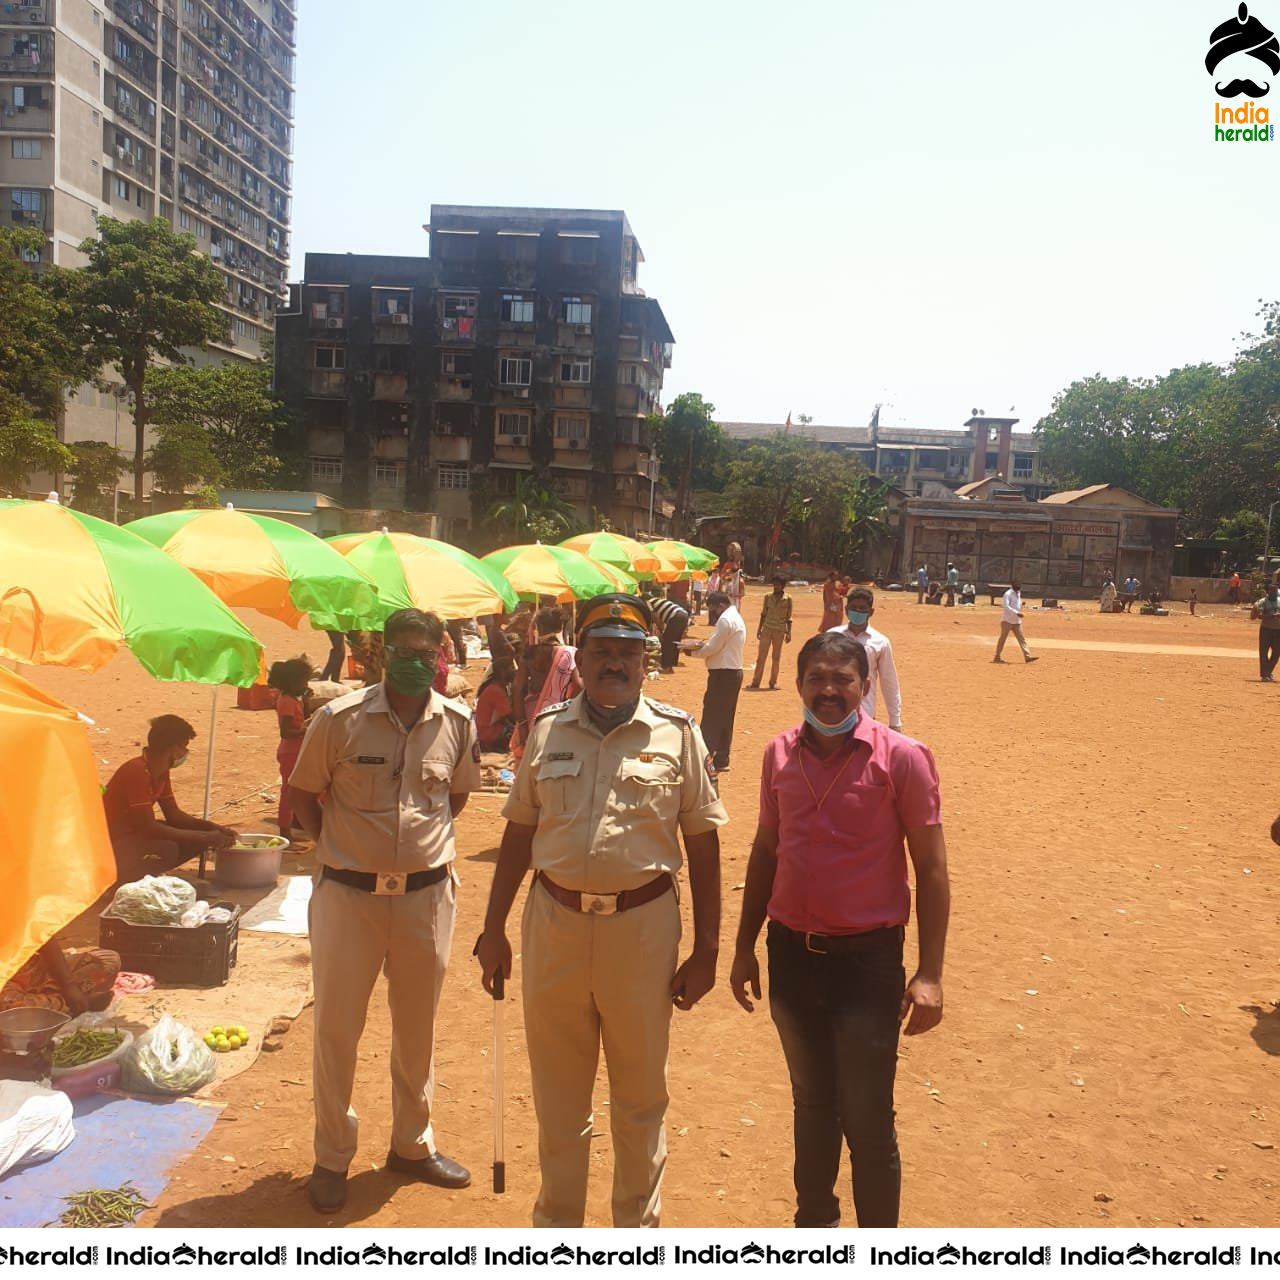 Police distributed umbrellas to vegetable vendors in open ground as a precaution against Corona Virus